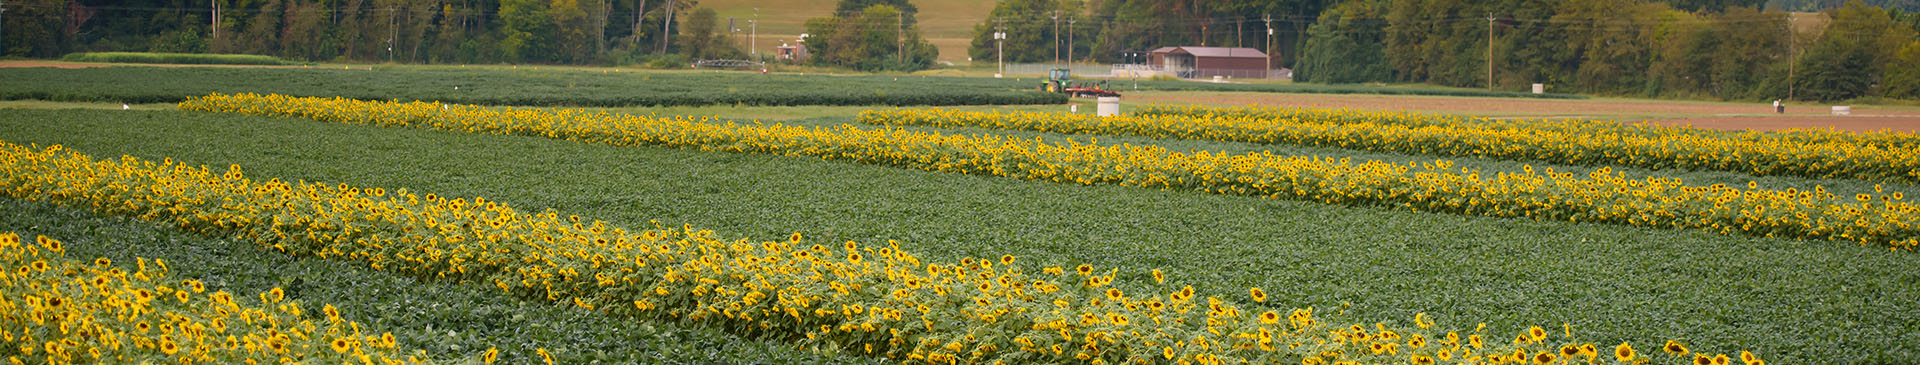 field of sunflowers at clemson university's piedmont research and education center